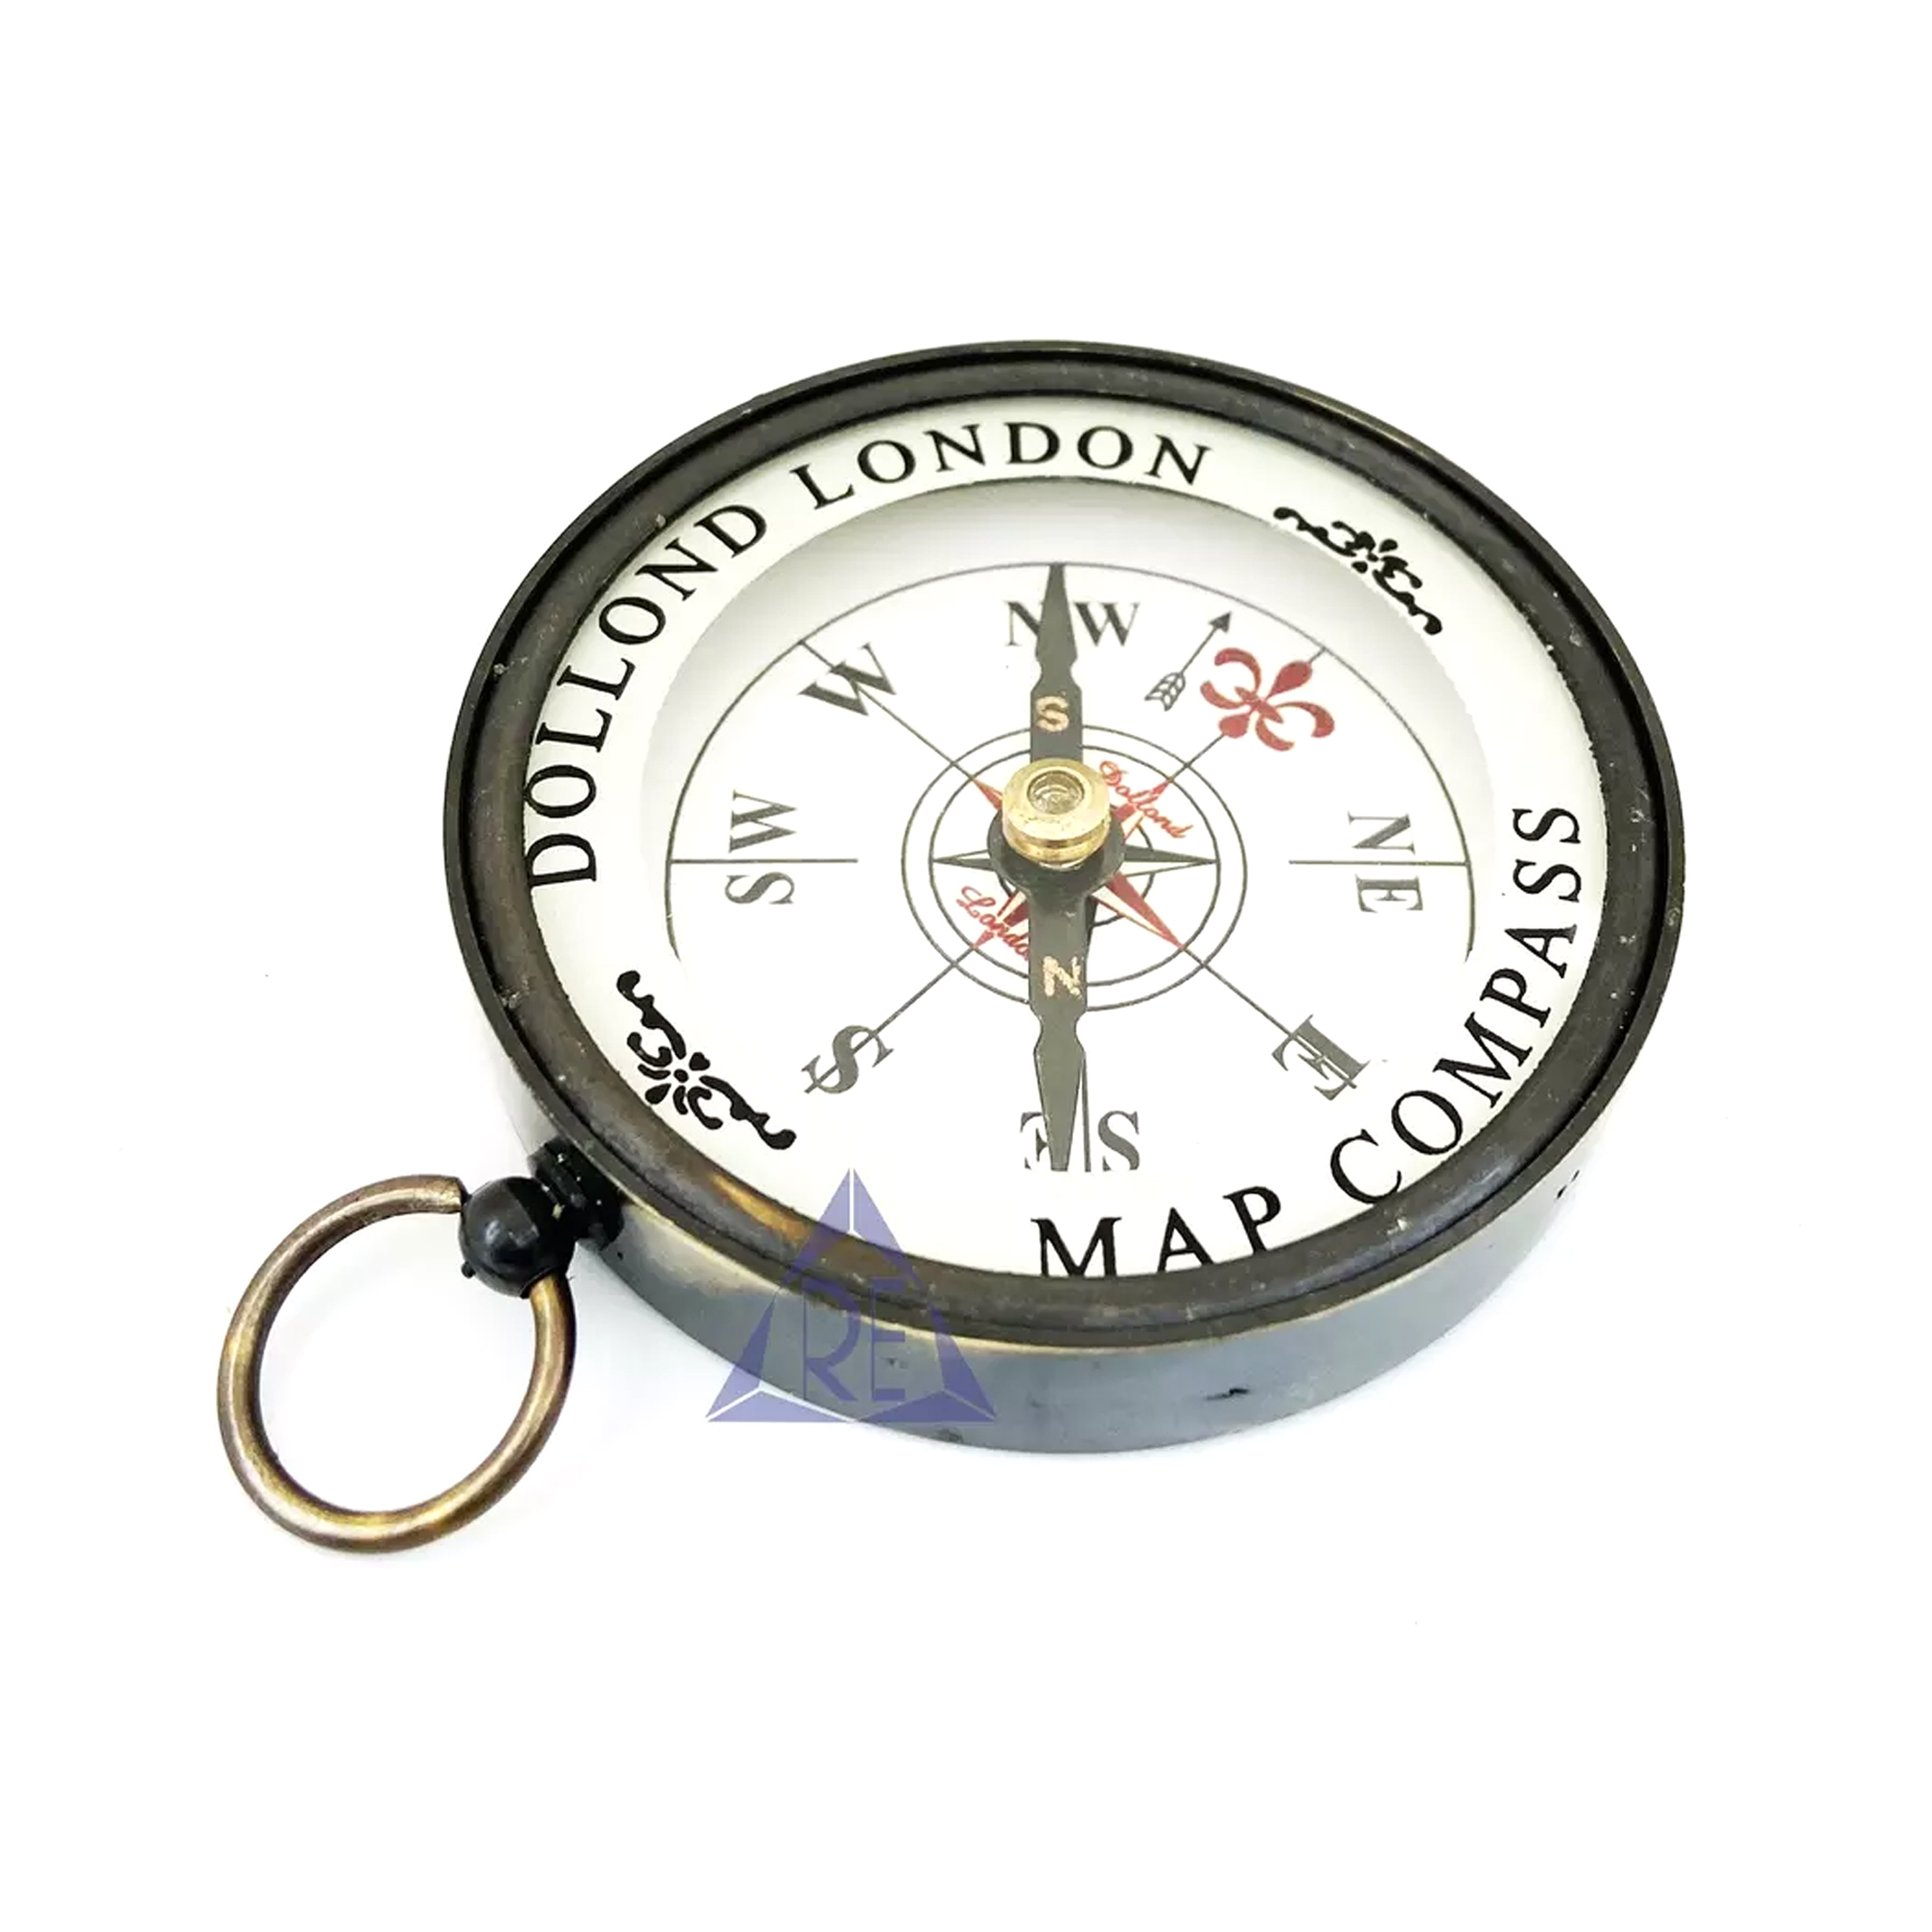 Prismatic Engineers Lensatic Map Compass Dollond London Compass Personalized Vintage Nautical Handheld Compass